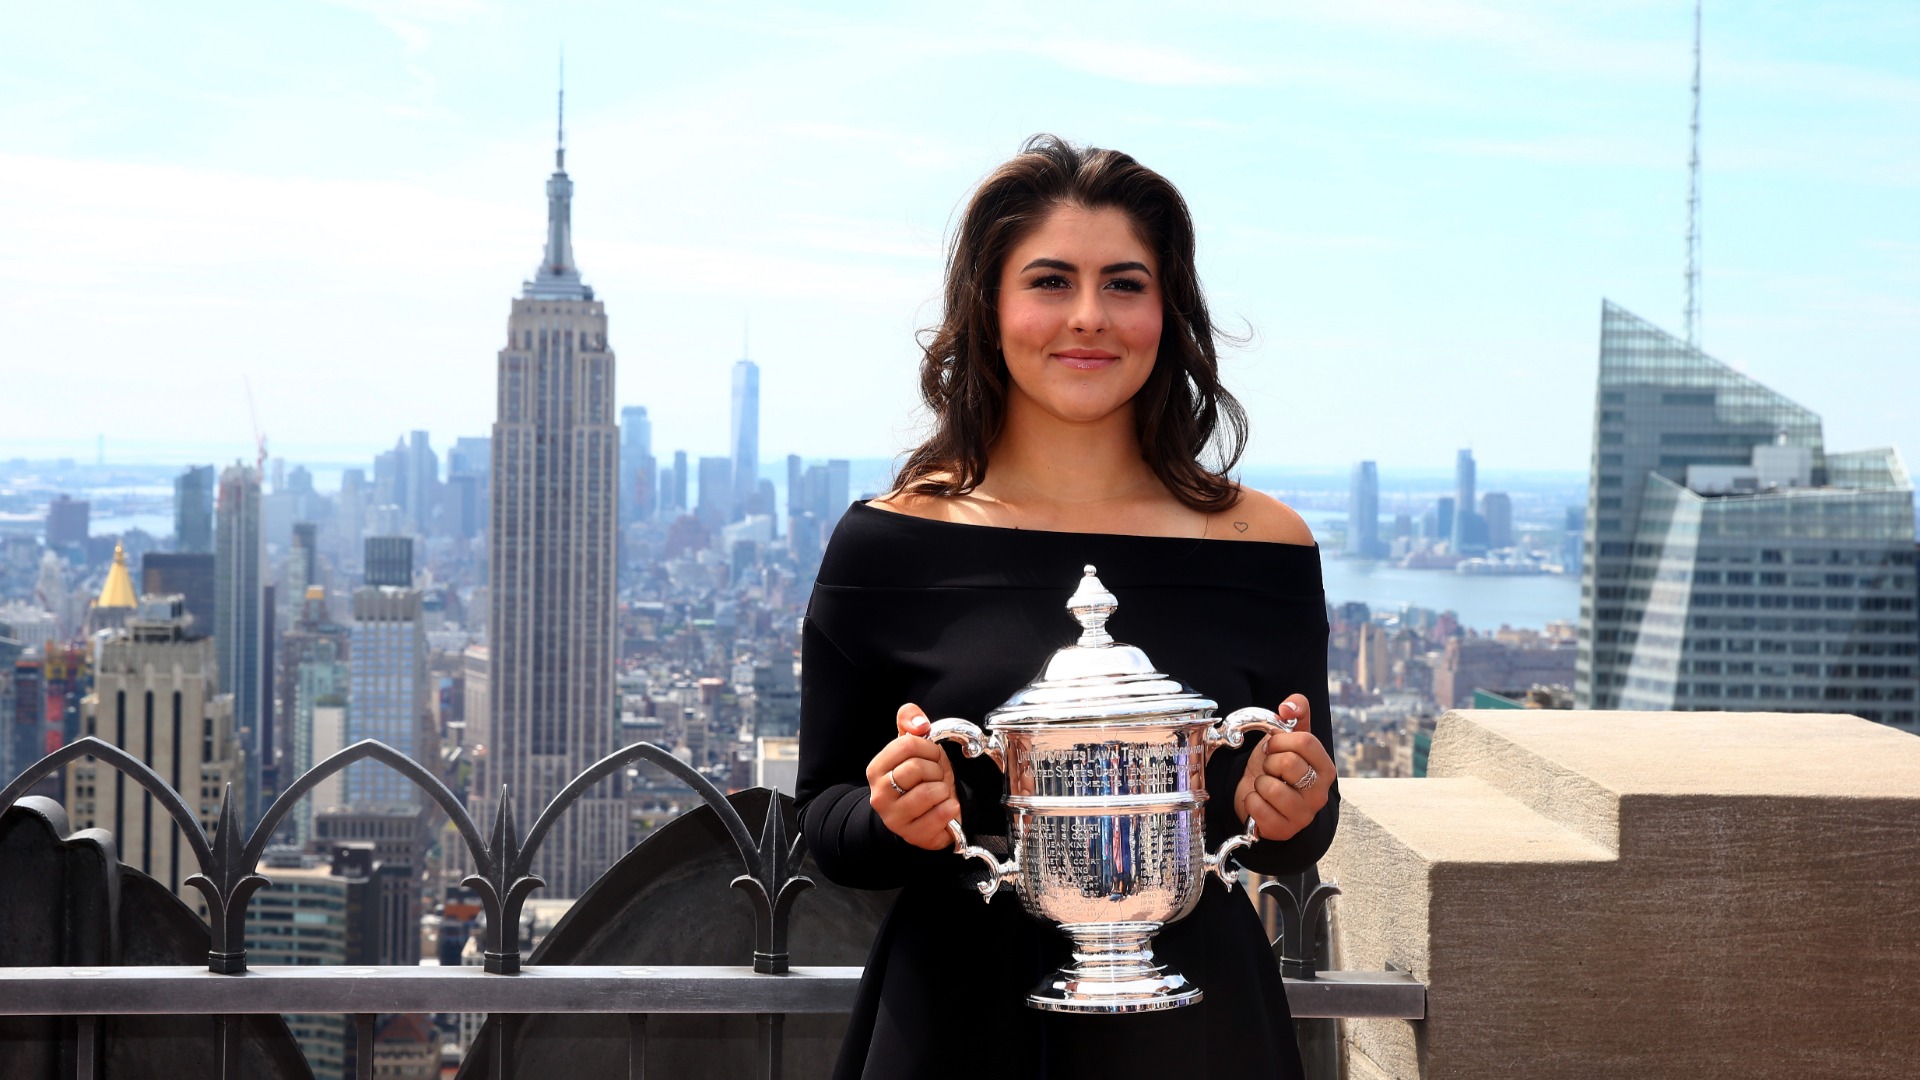 I'm not done yet! - US Open champion Andreescu 'could definitely get used to' winning feeling